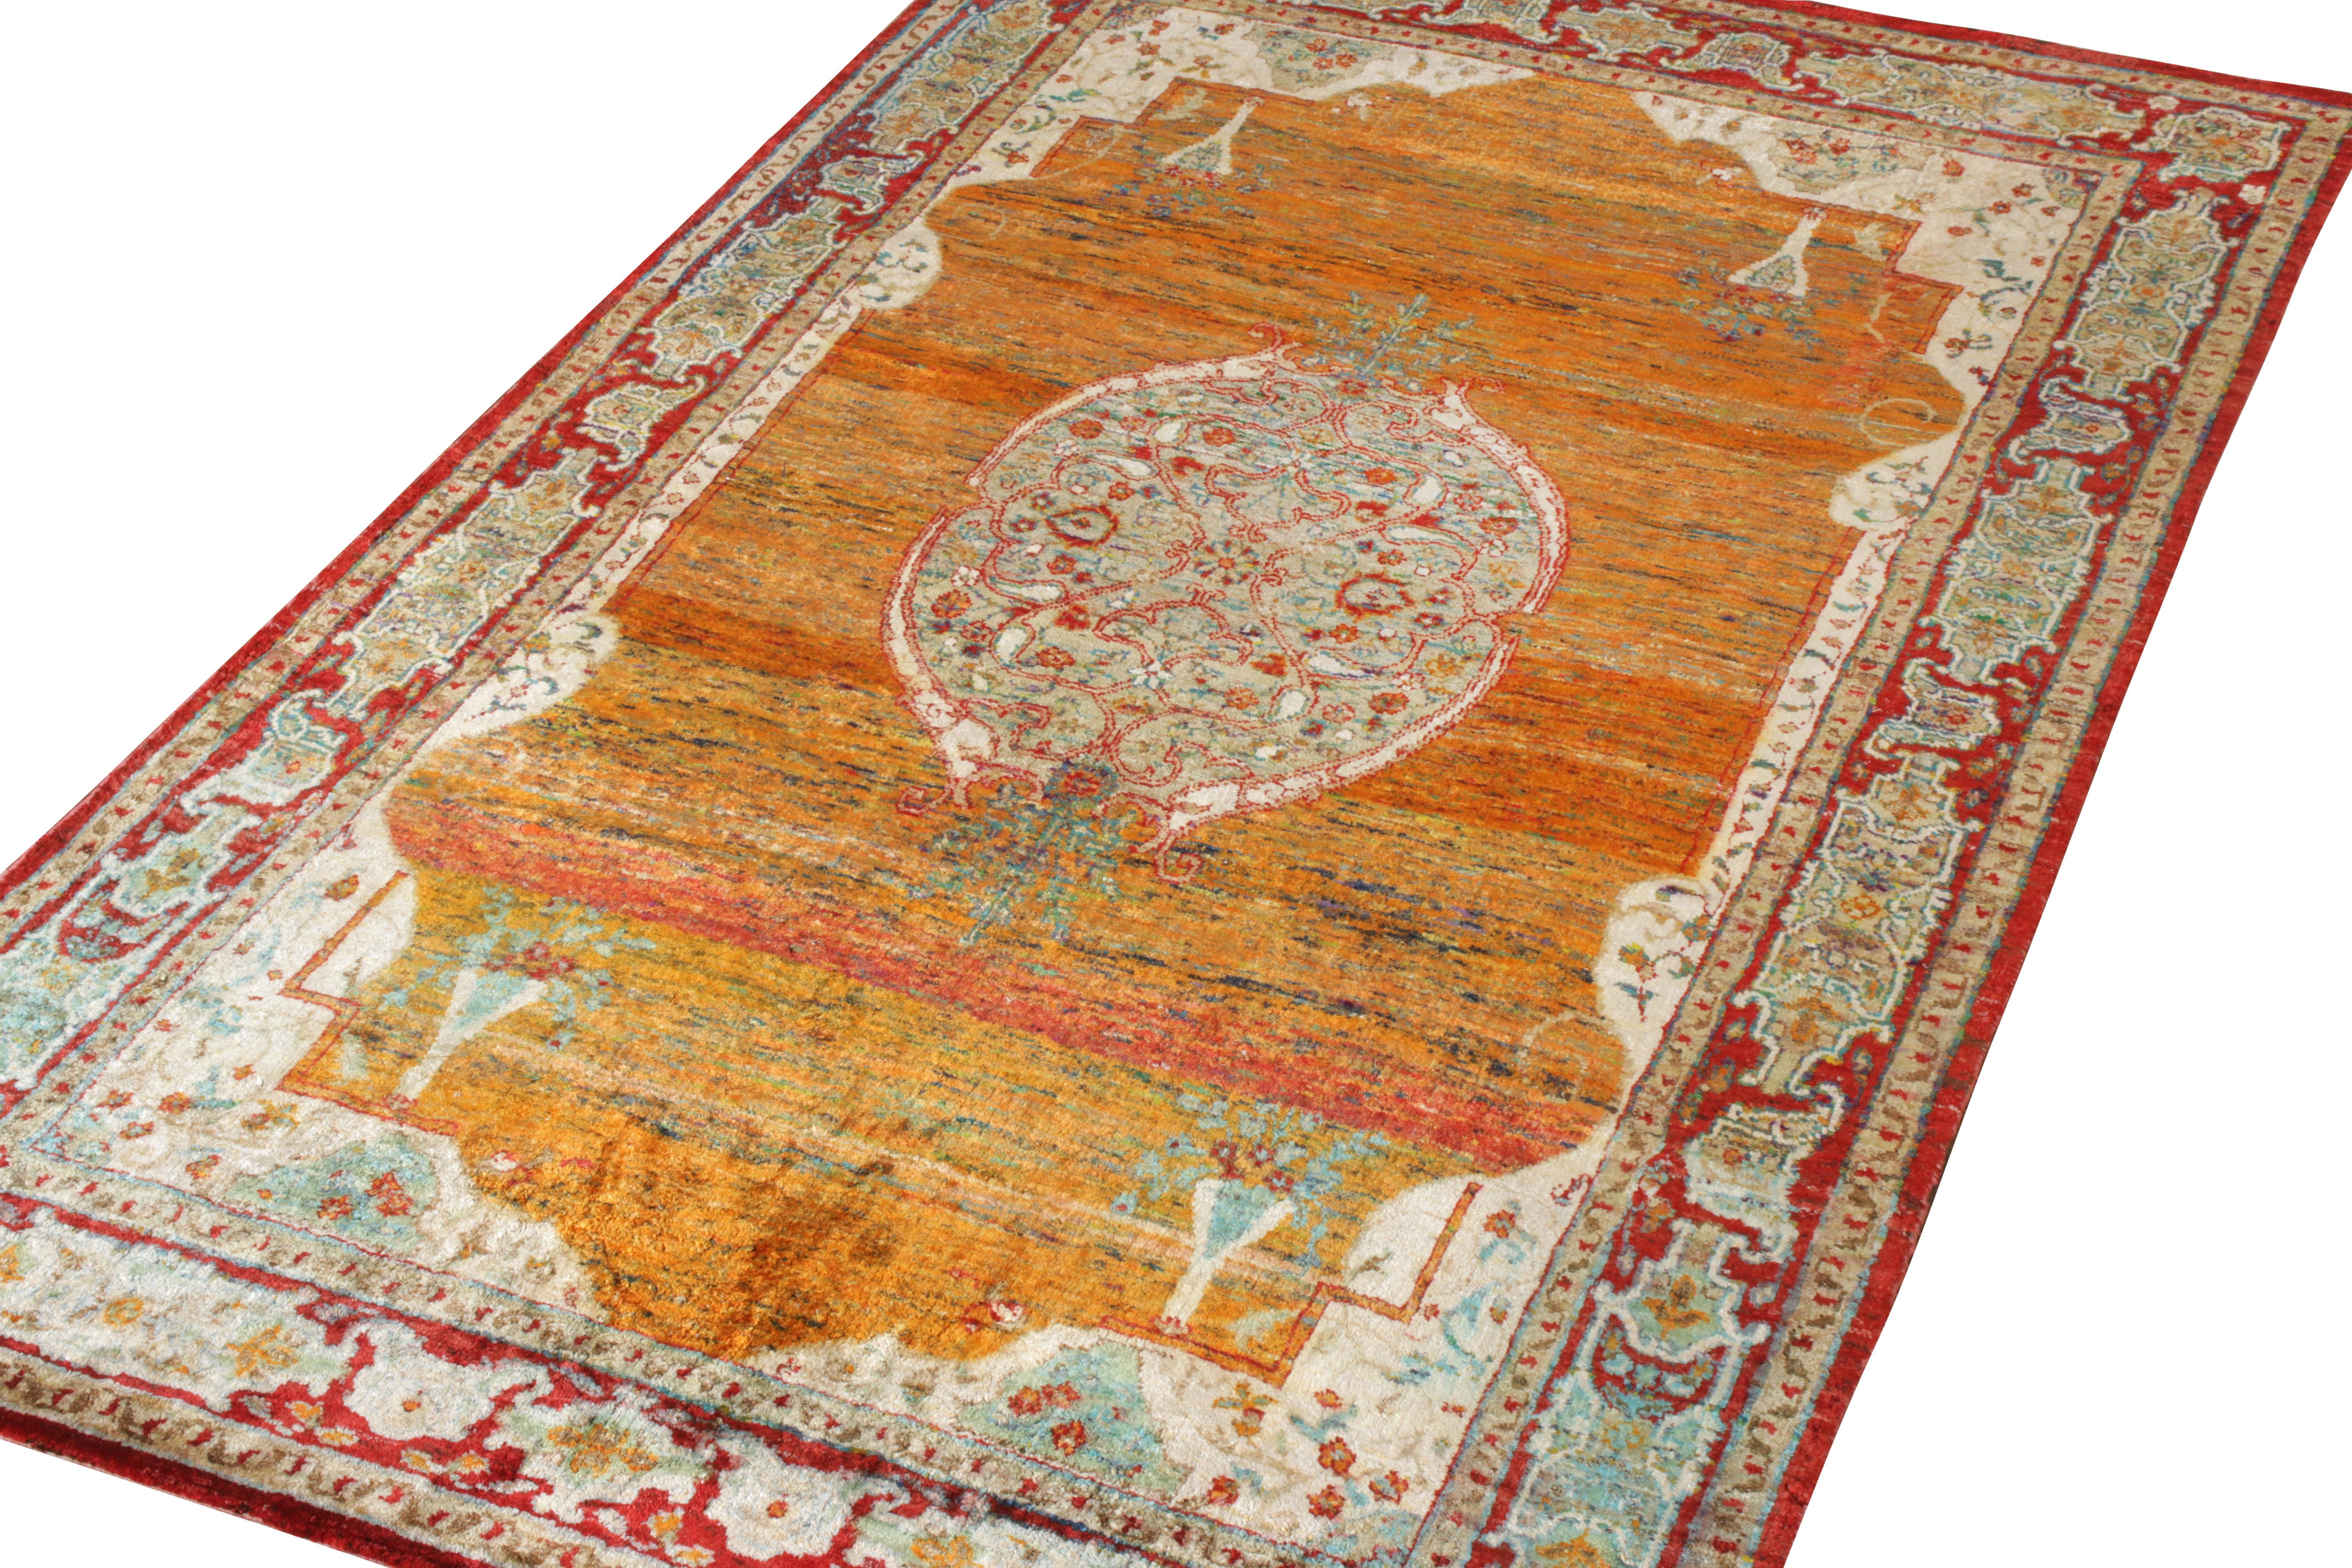 Indian Rug & Kilim’s Classic Agra Style Rug in Orange-Red, Blue Medallion Pattern For Sale